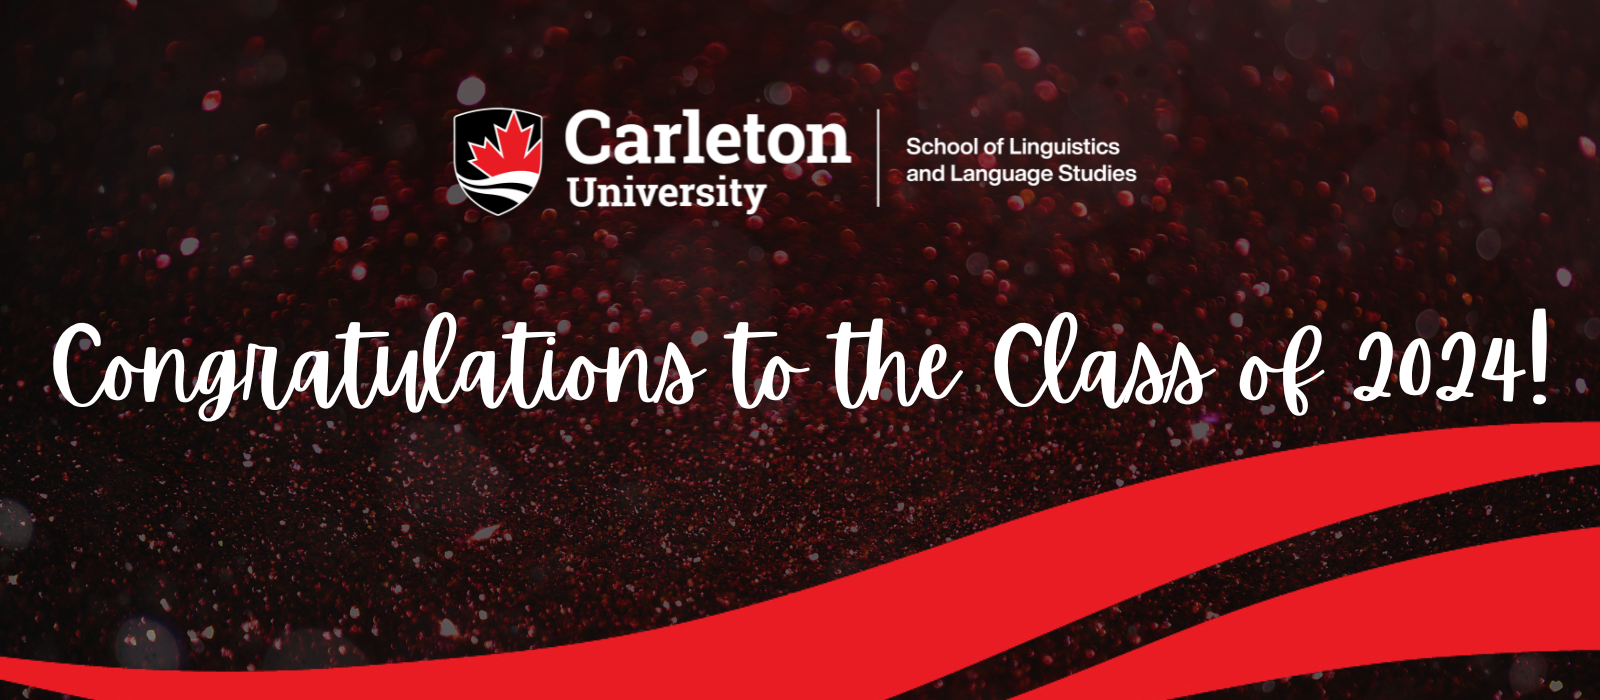 Banner image showing Carleton logo and text "Congratulations to the Class of 2024!"